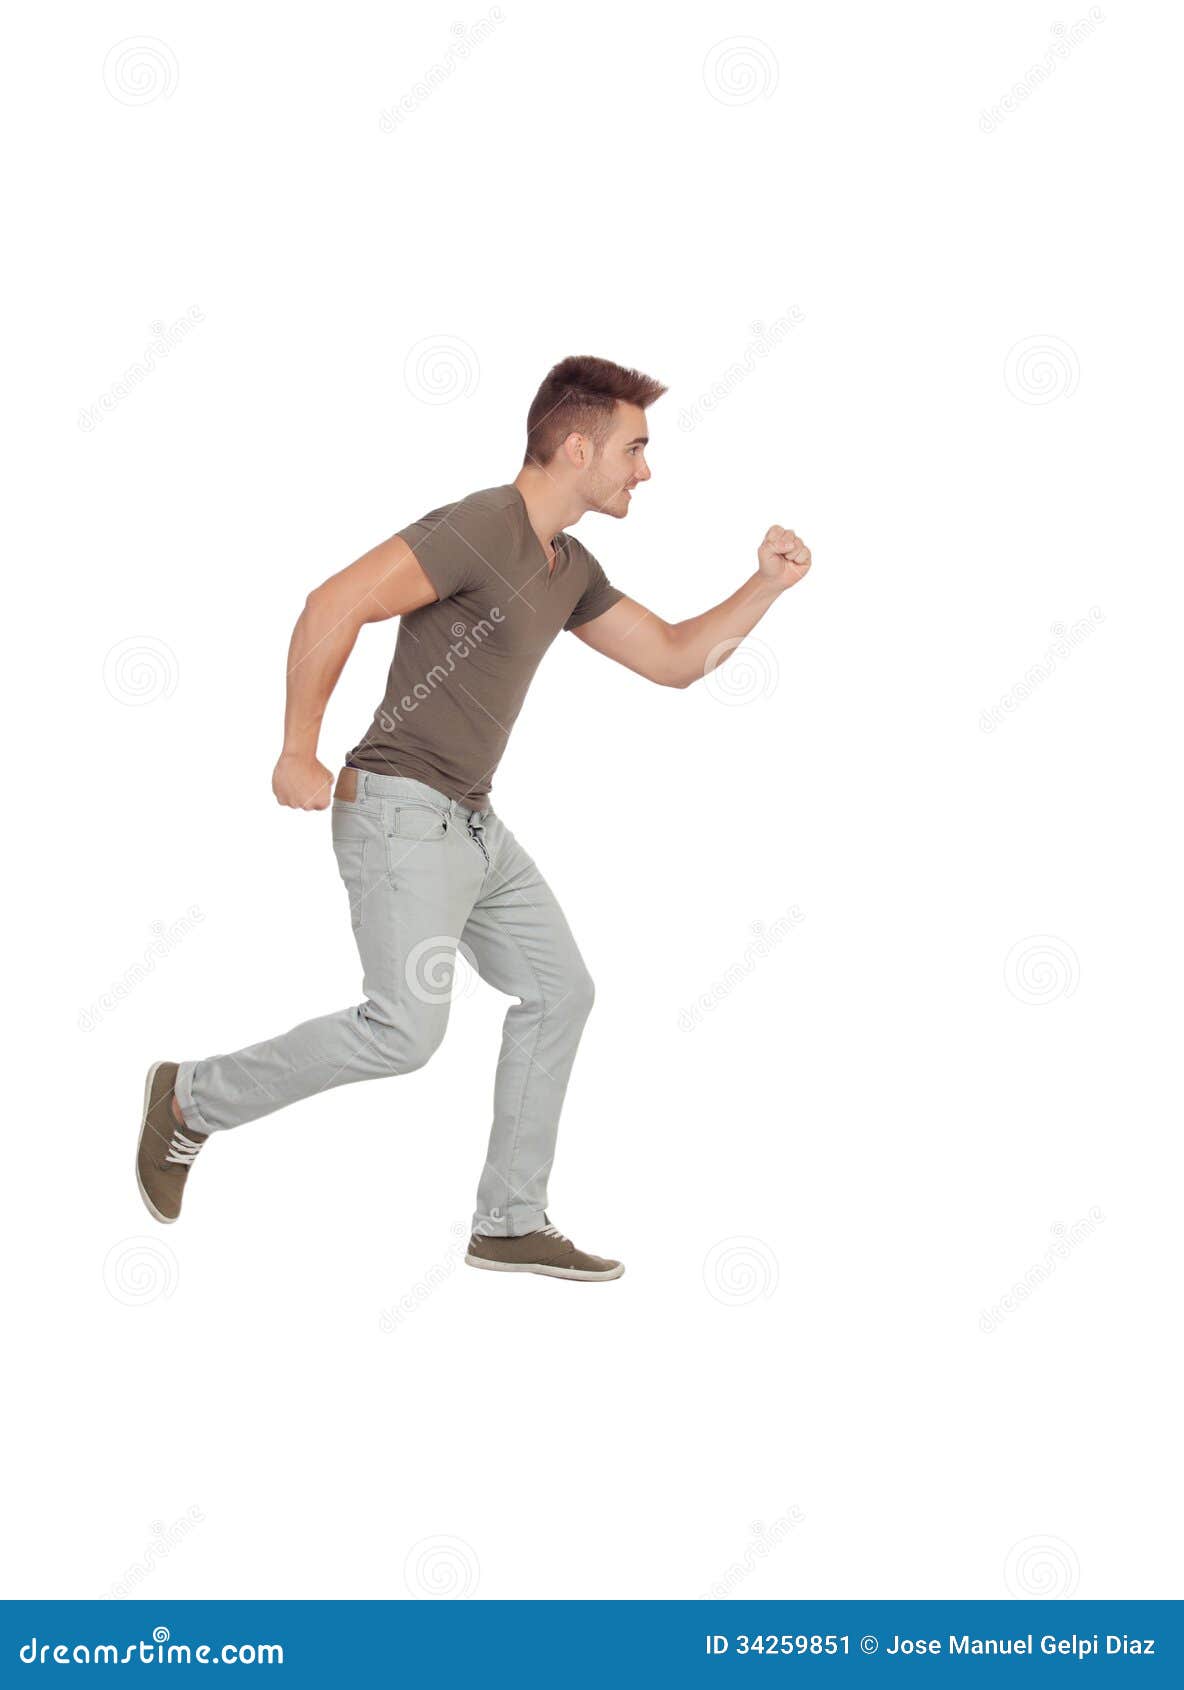 Casual young man running stock image 